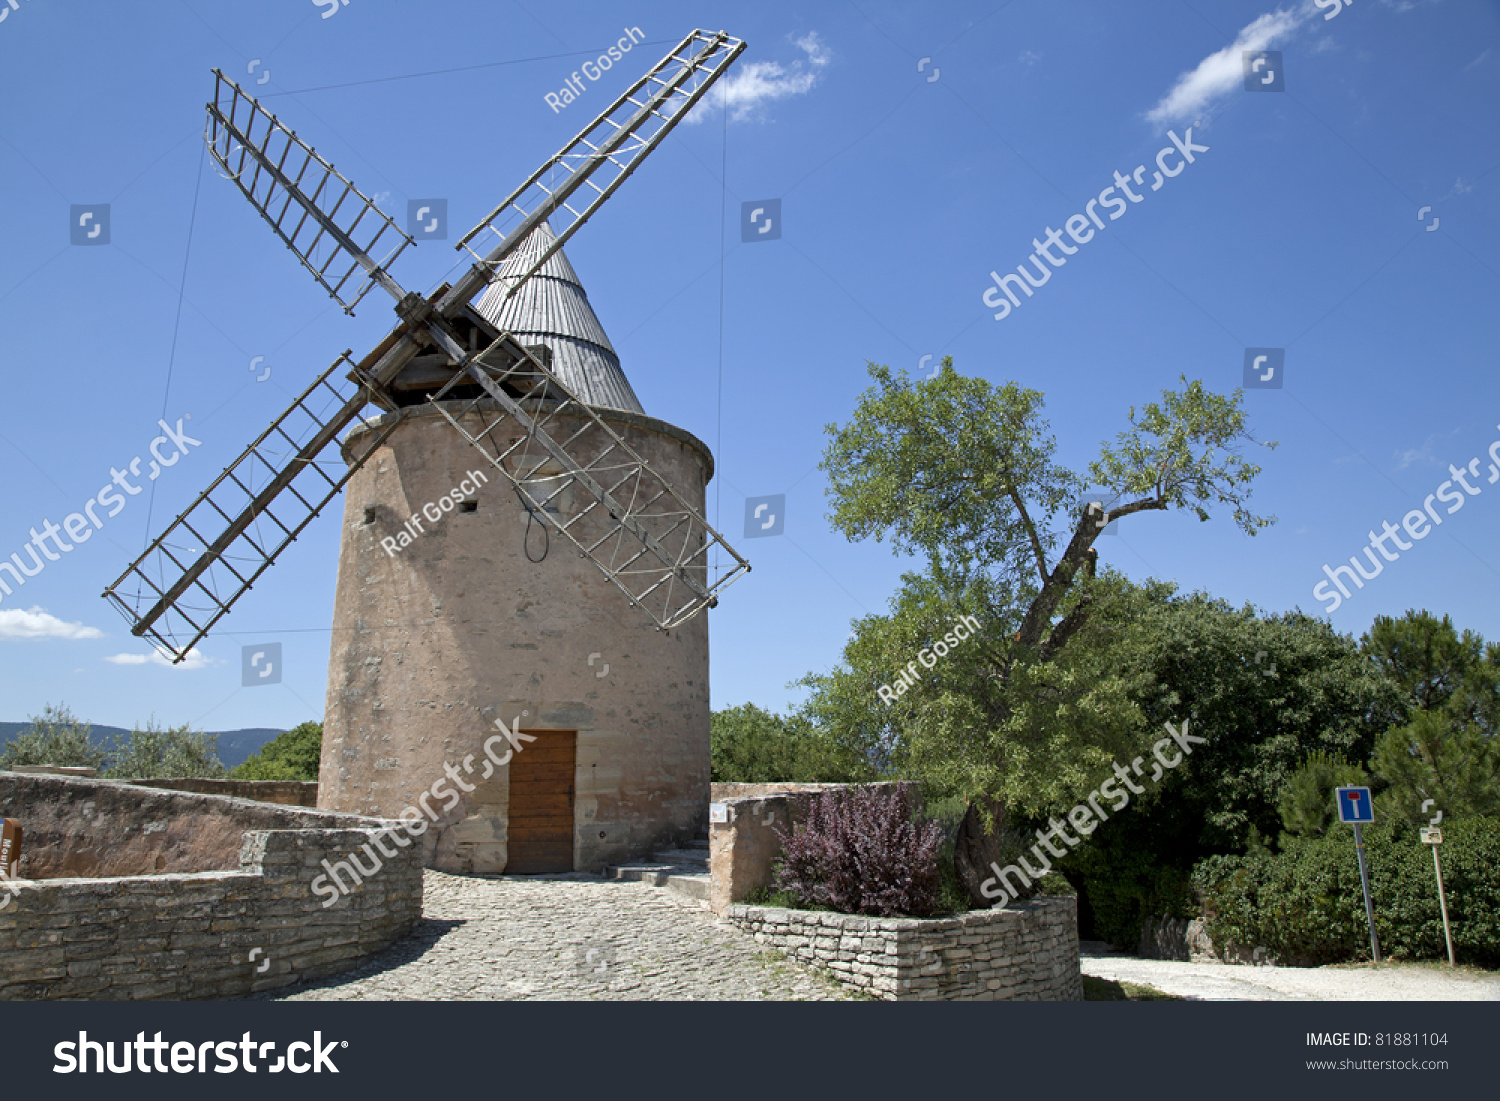 Traditional windmill in Goult, Provence region, France #81881104